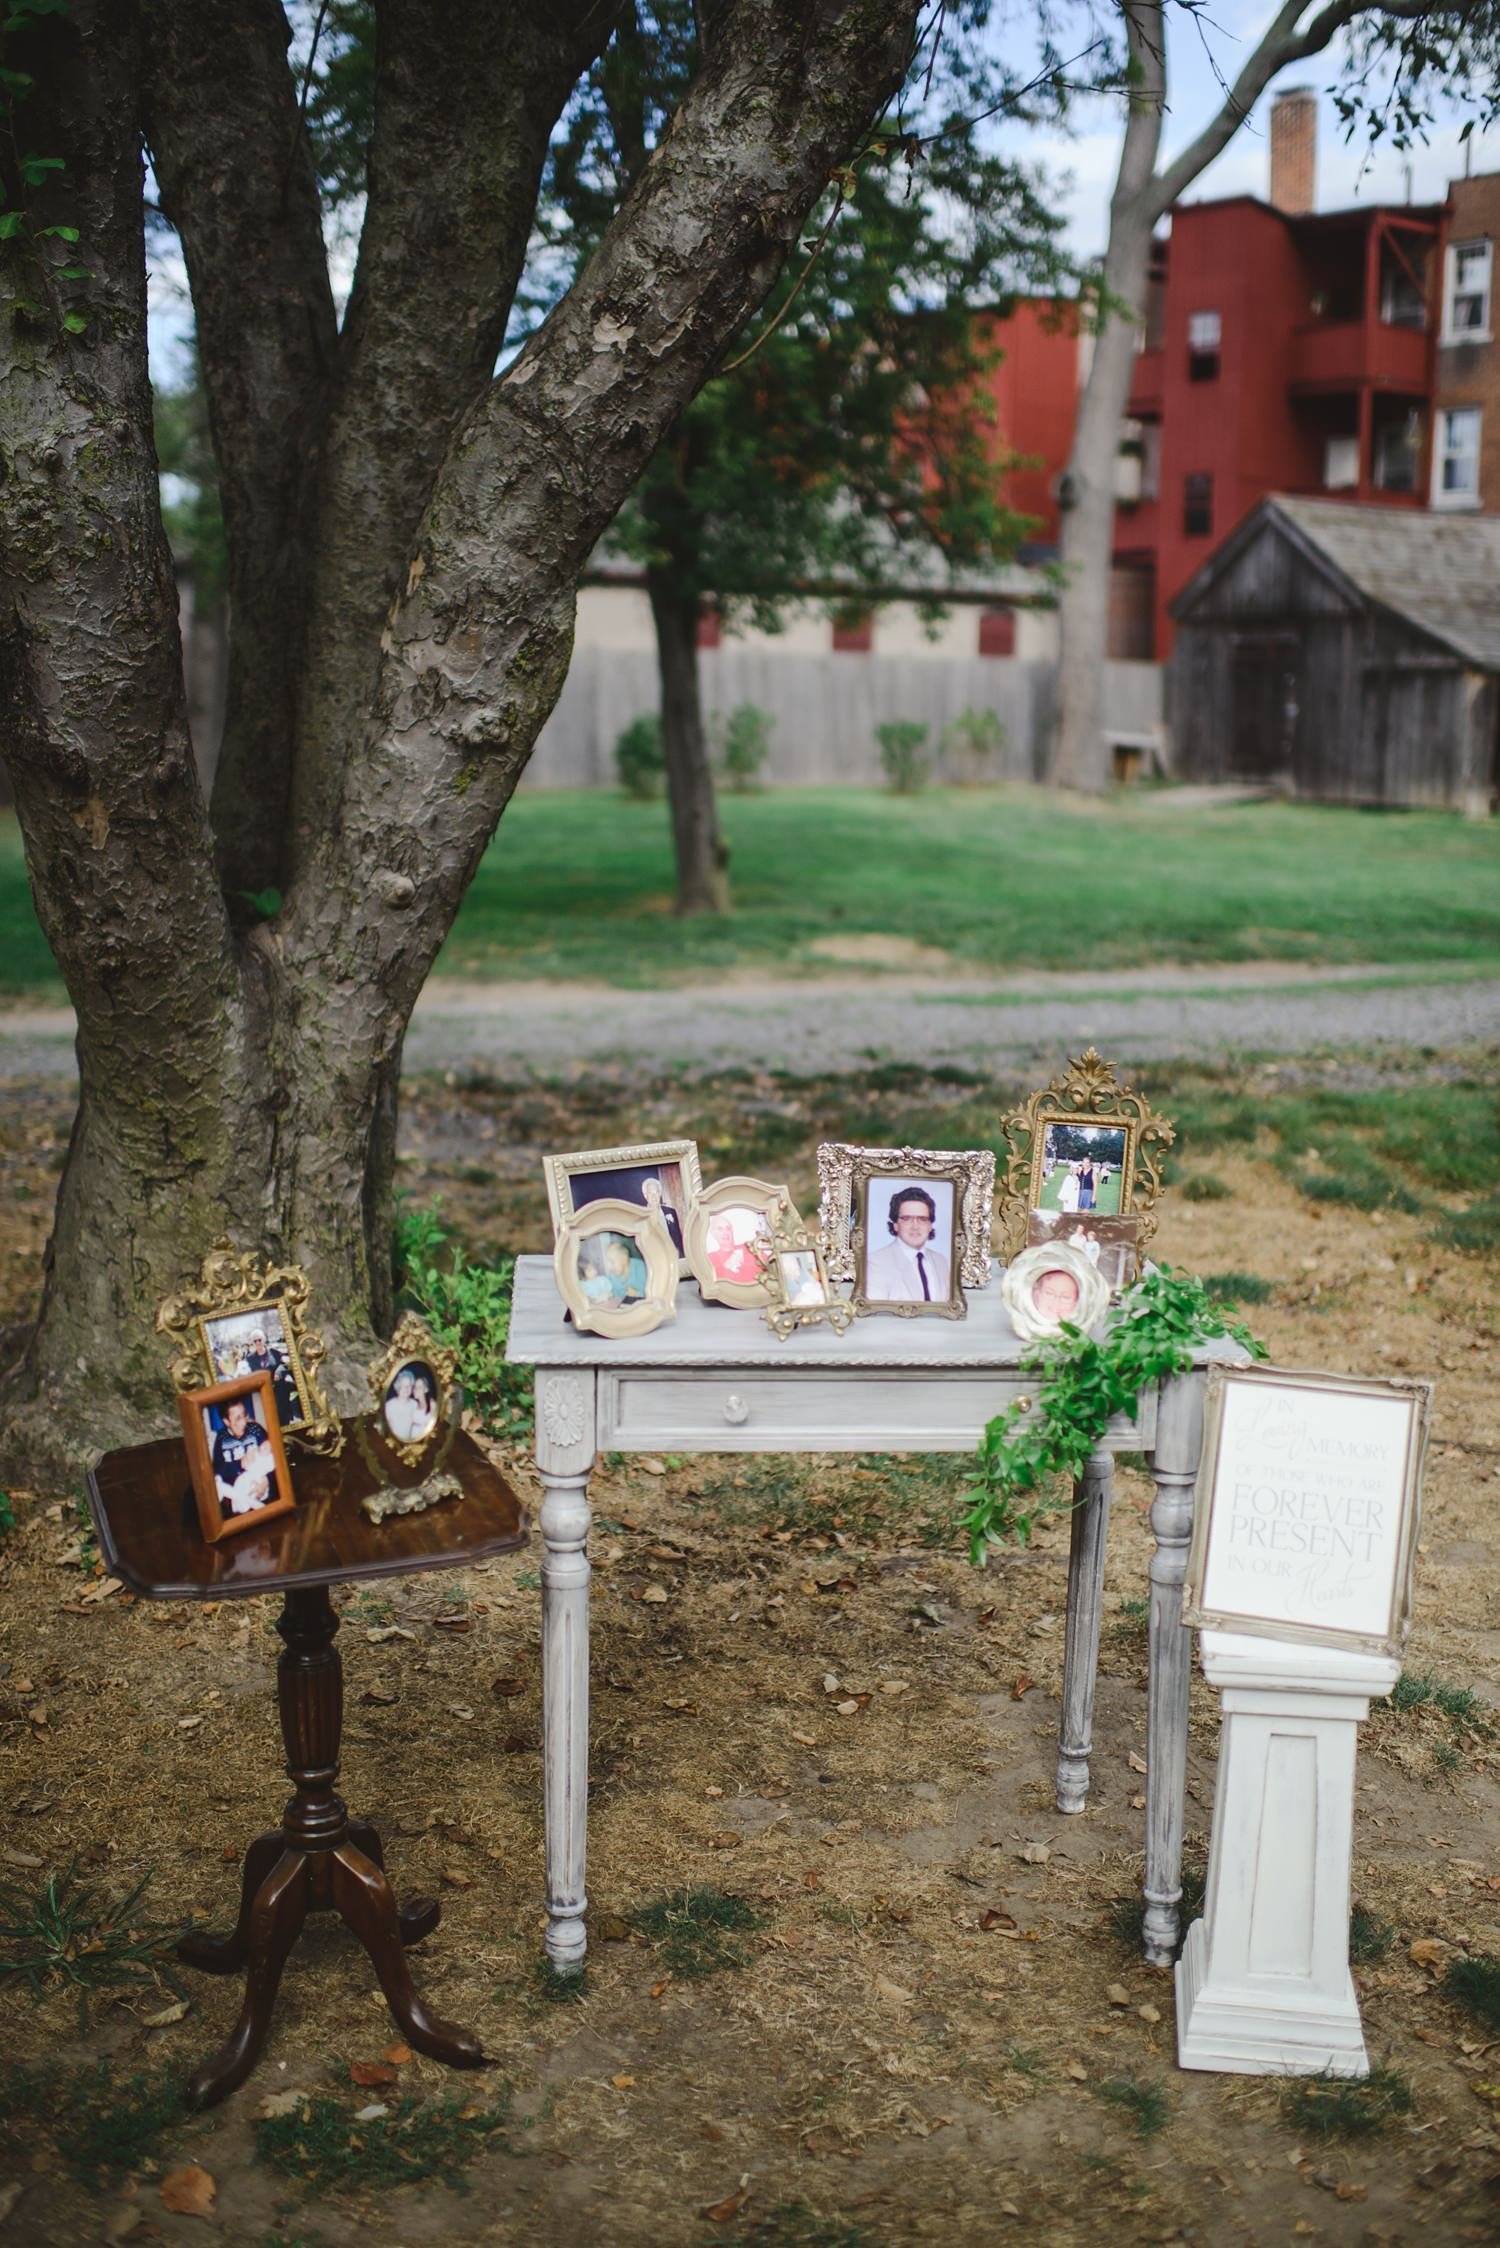 Rustic & glamorous wedding at The Webb Barn in Wethersfield with lawn games